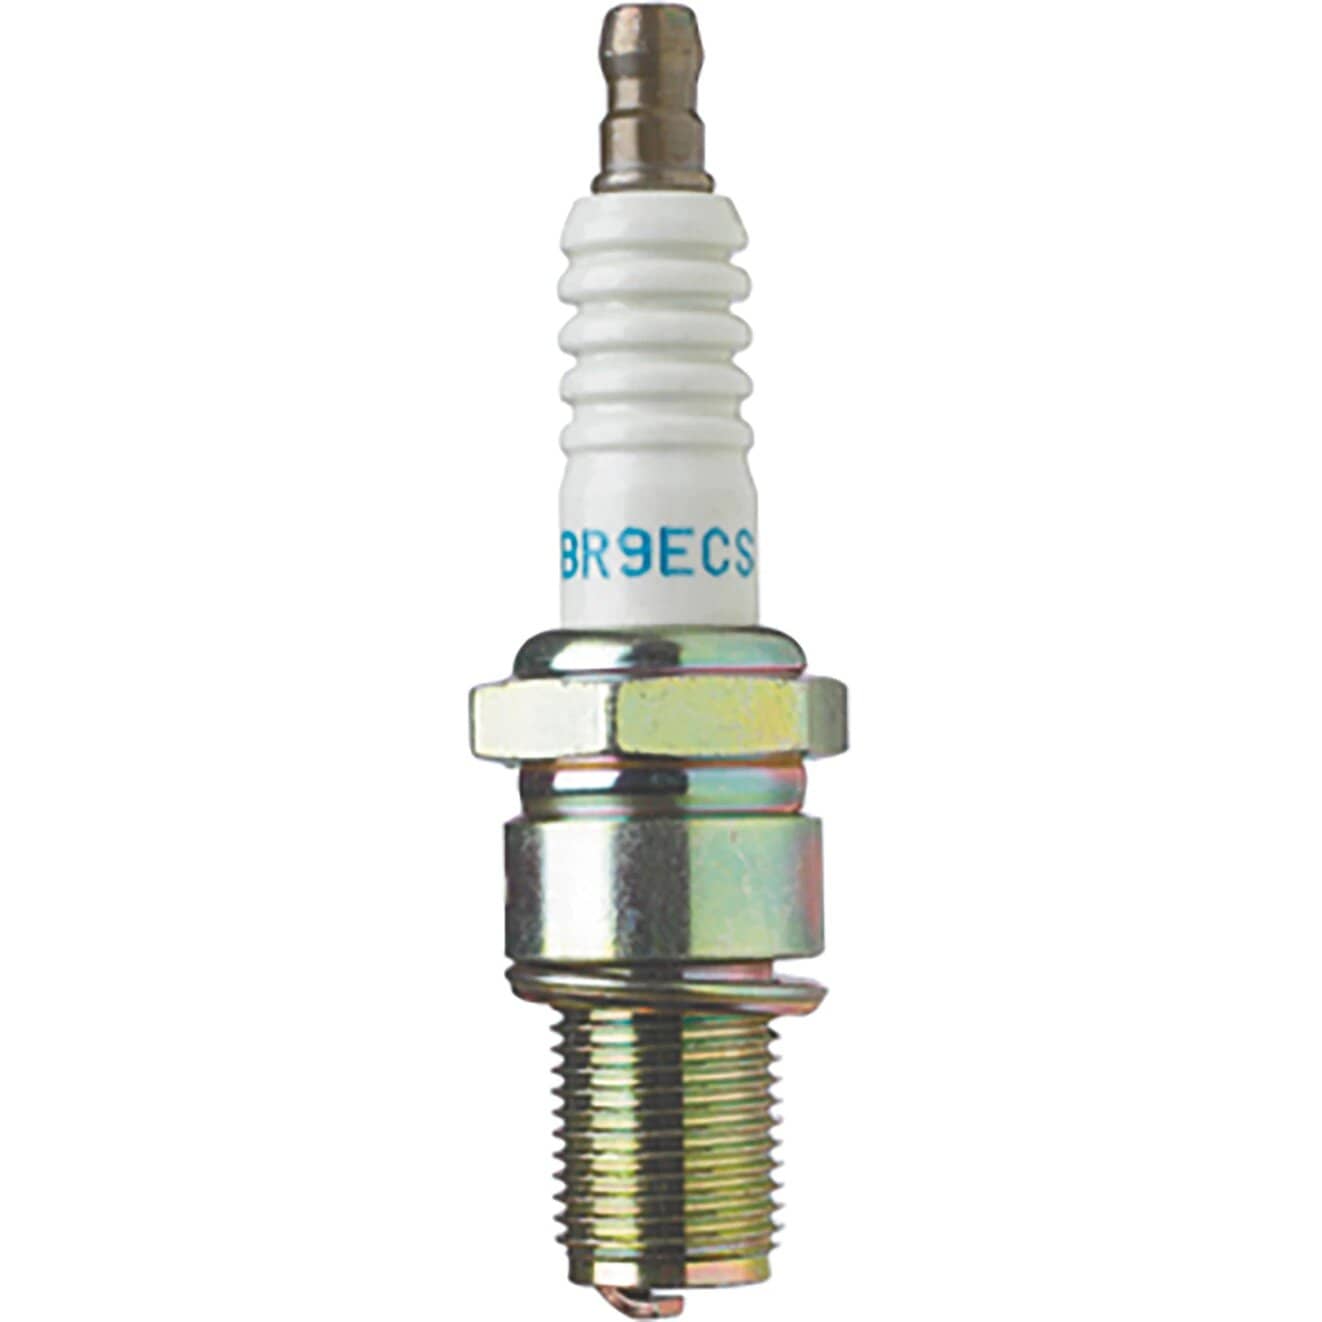 NGK Spark Plugs - 415129403 - The Parts Lodge